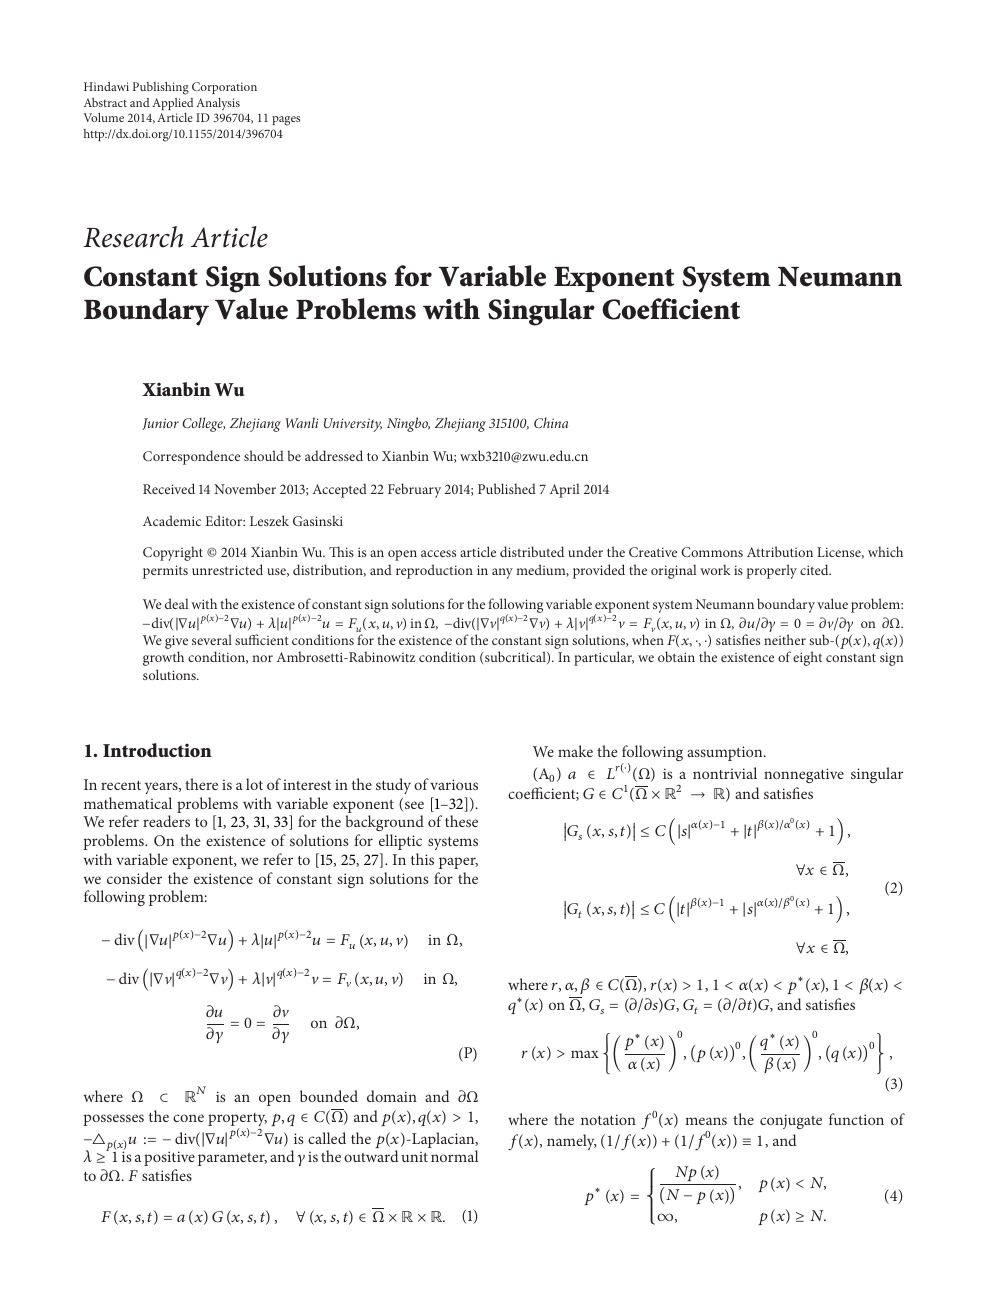 Constant Sign Solutions For Variable Exponent System Neumann Boundary Value Problems With Singular Coefficient Topic Of Research Paper In Mathematics Download Scholarly Article Pdf And Read For Free On Cyberleninka Open